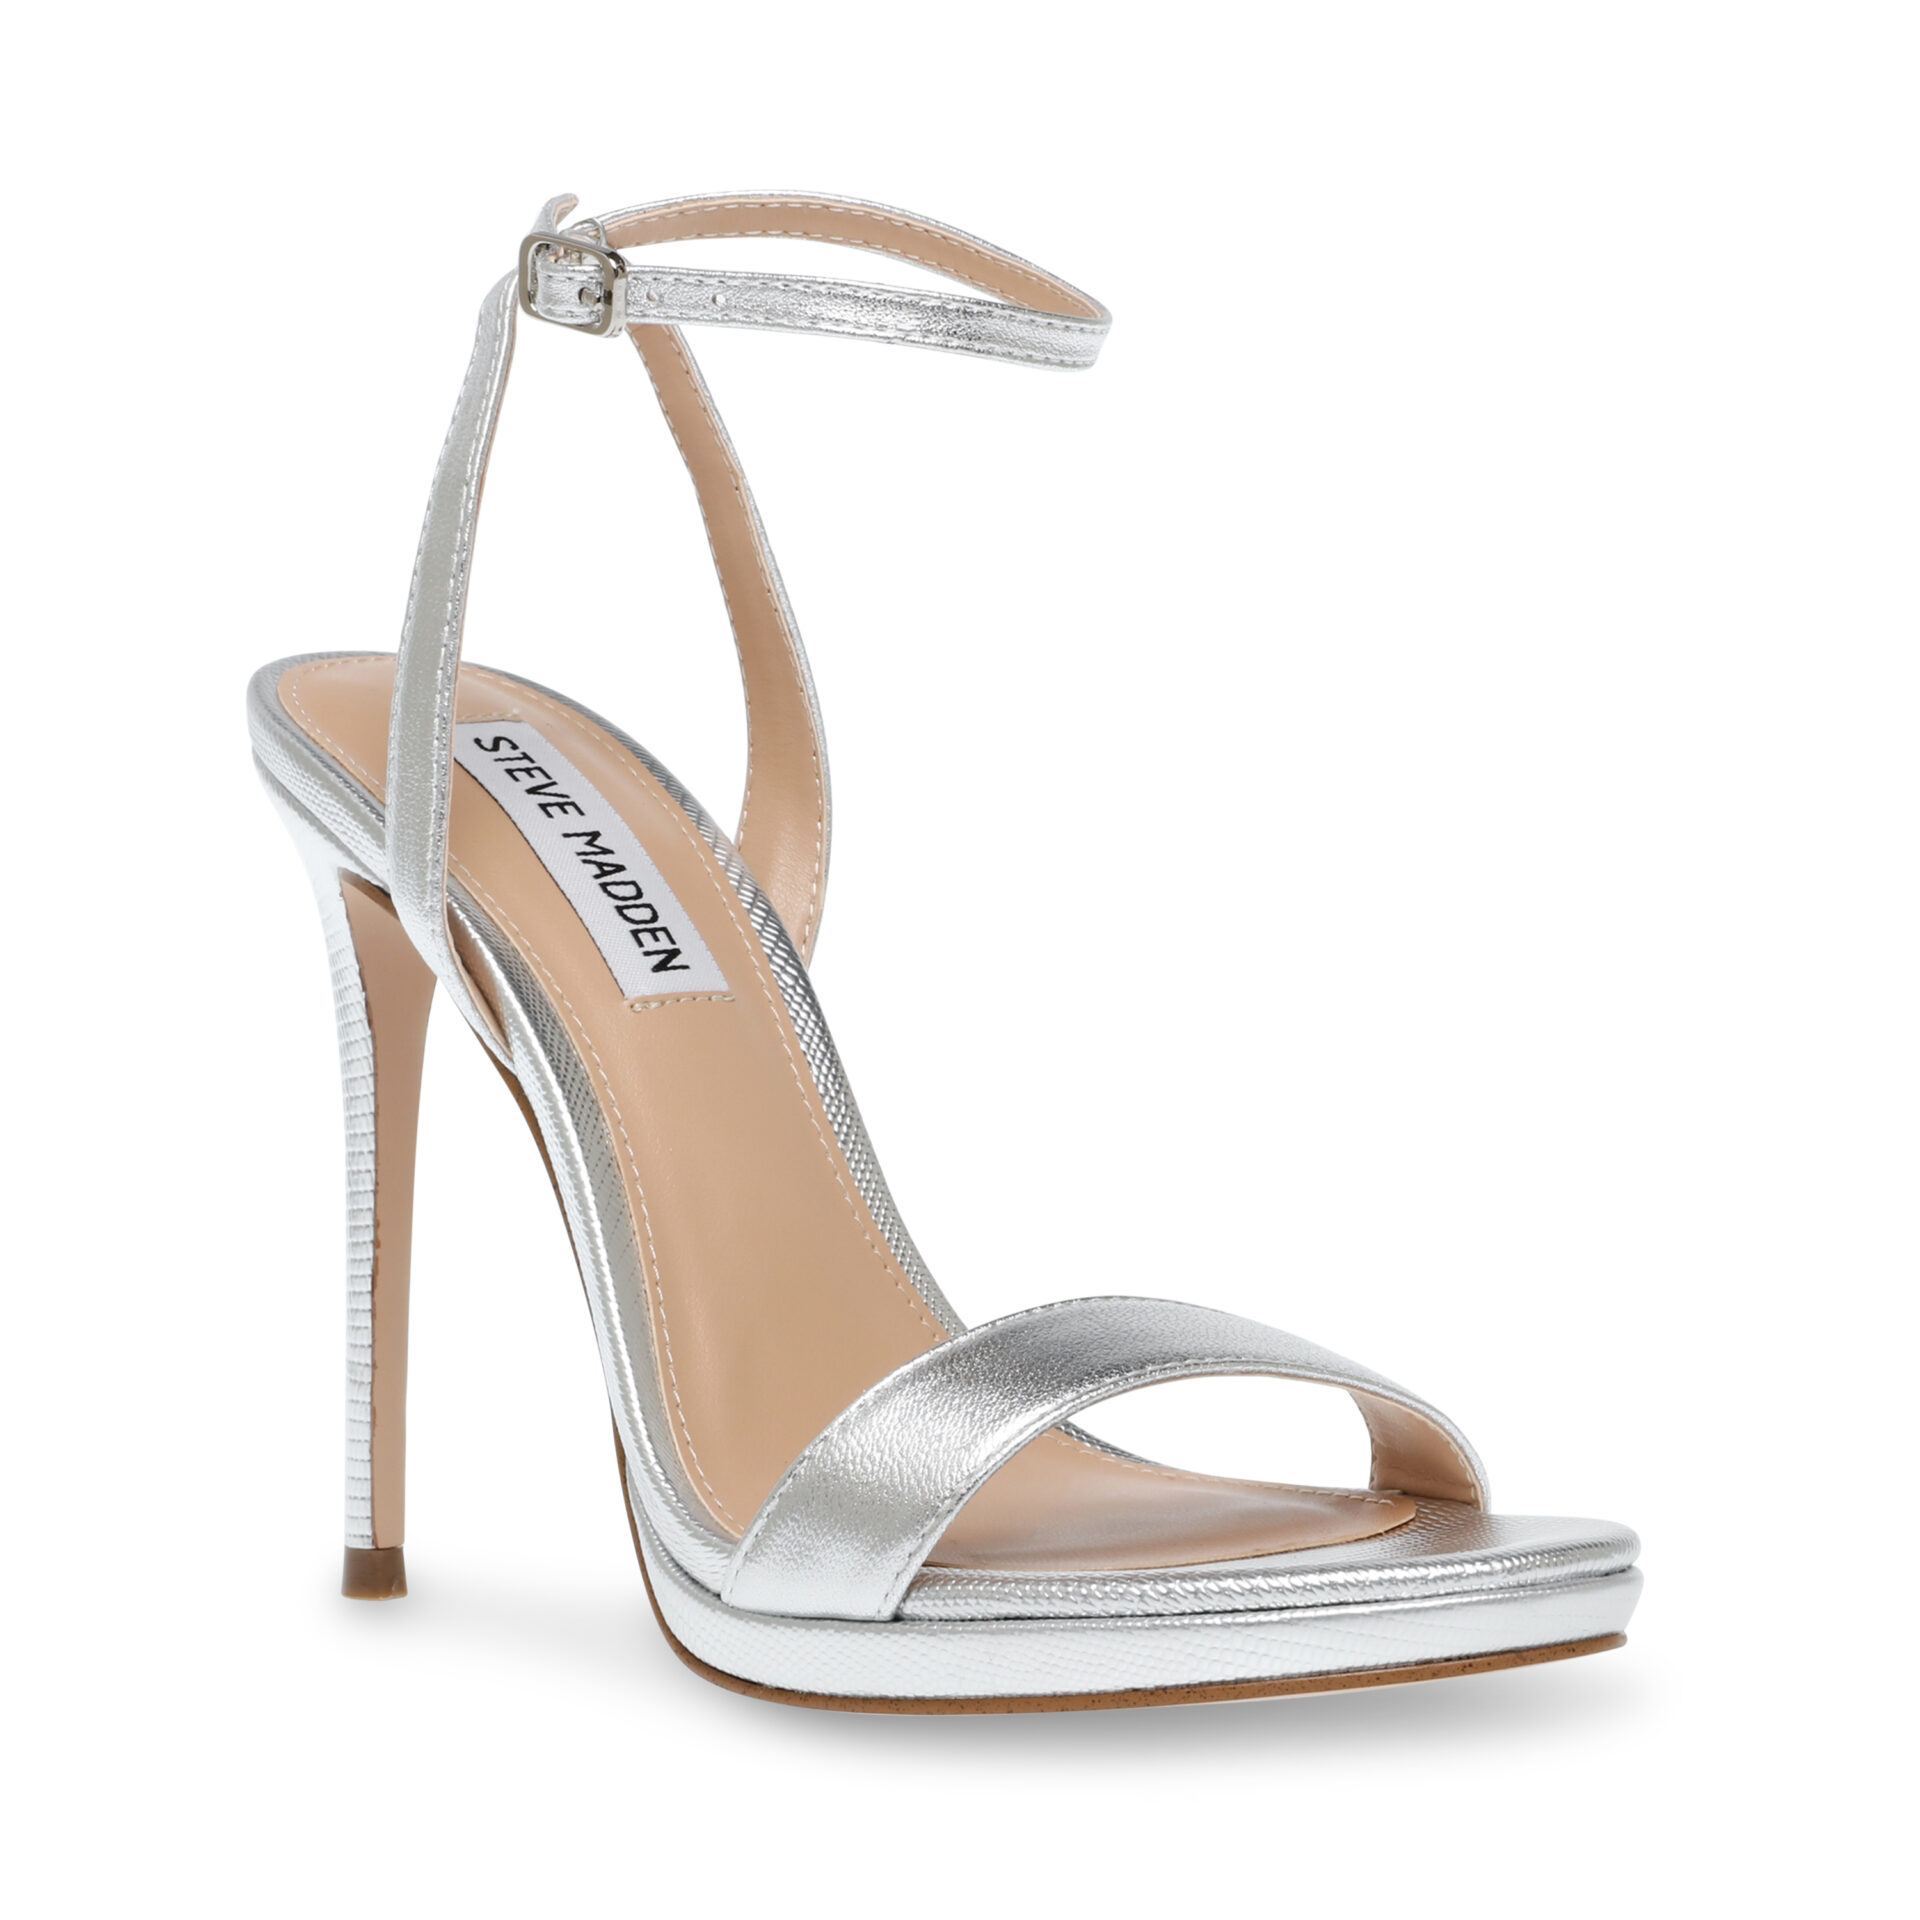 STEVE MADDEN WORDLY Silver